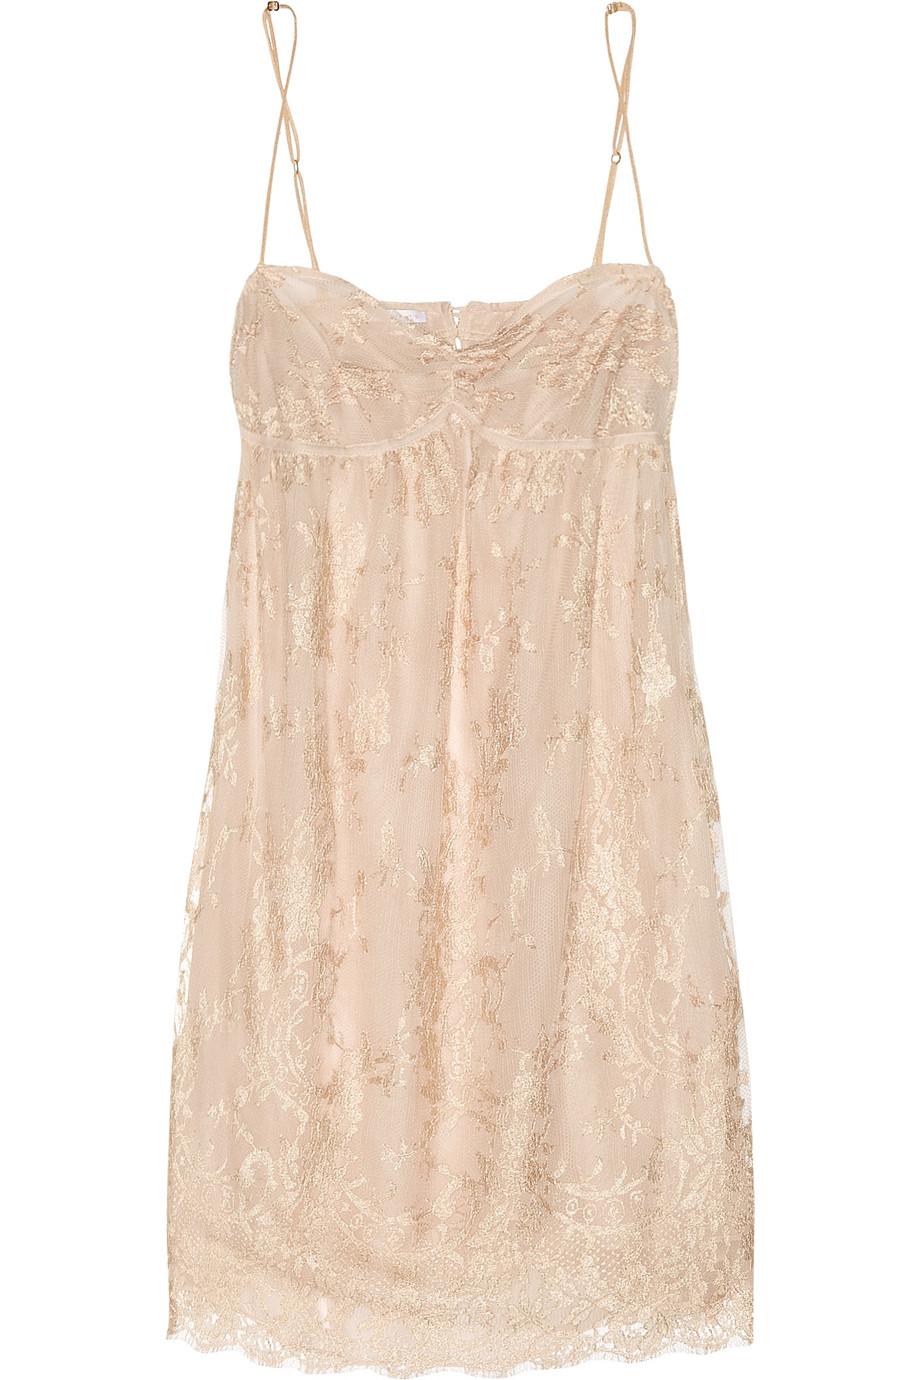 Lyst - Rosamosario Camiamo Chantilly Lace Chemise in Pink